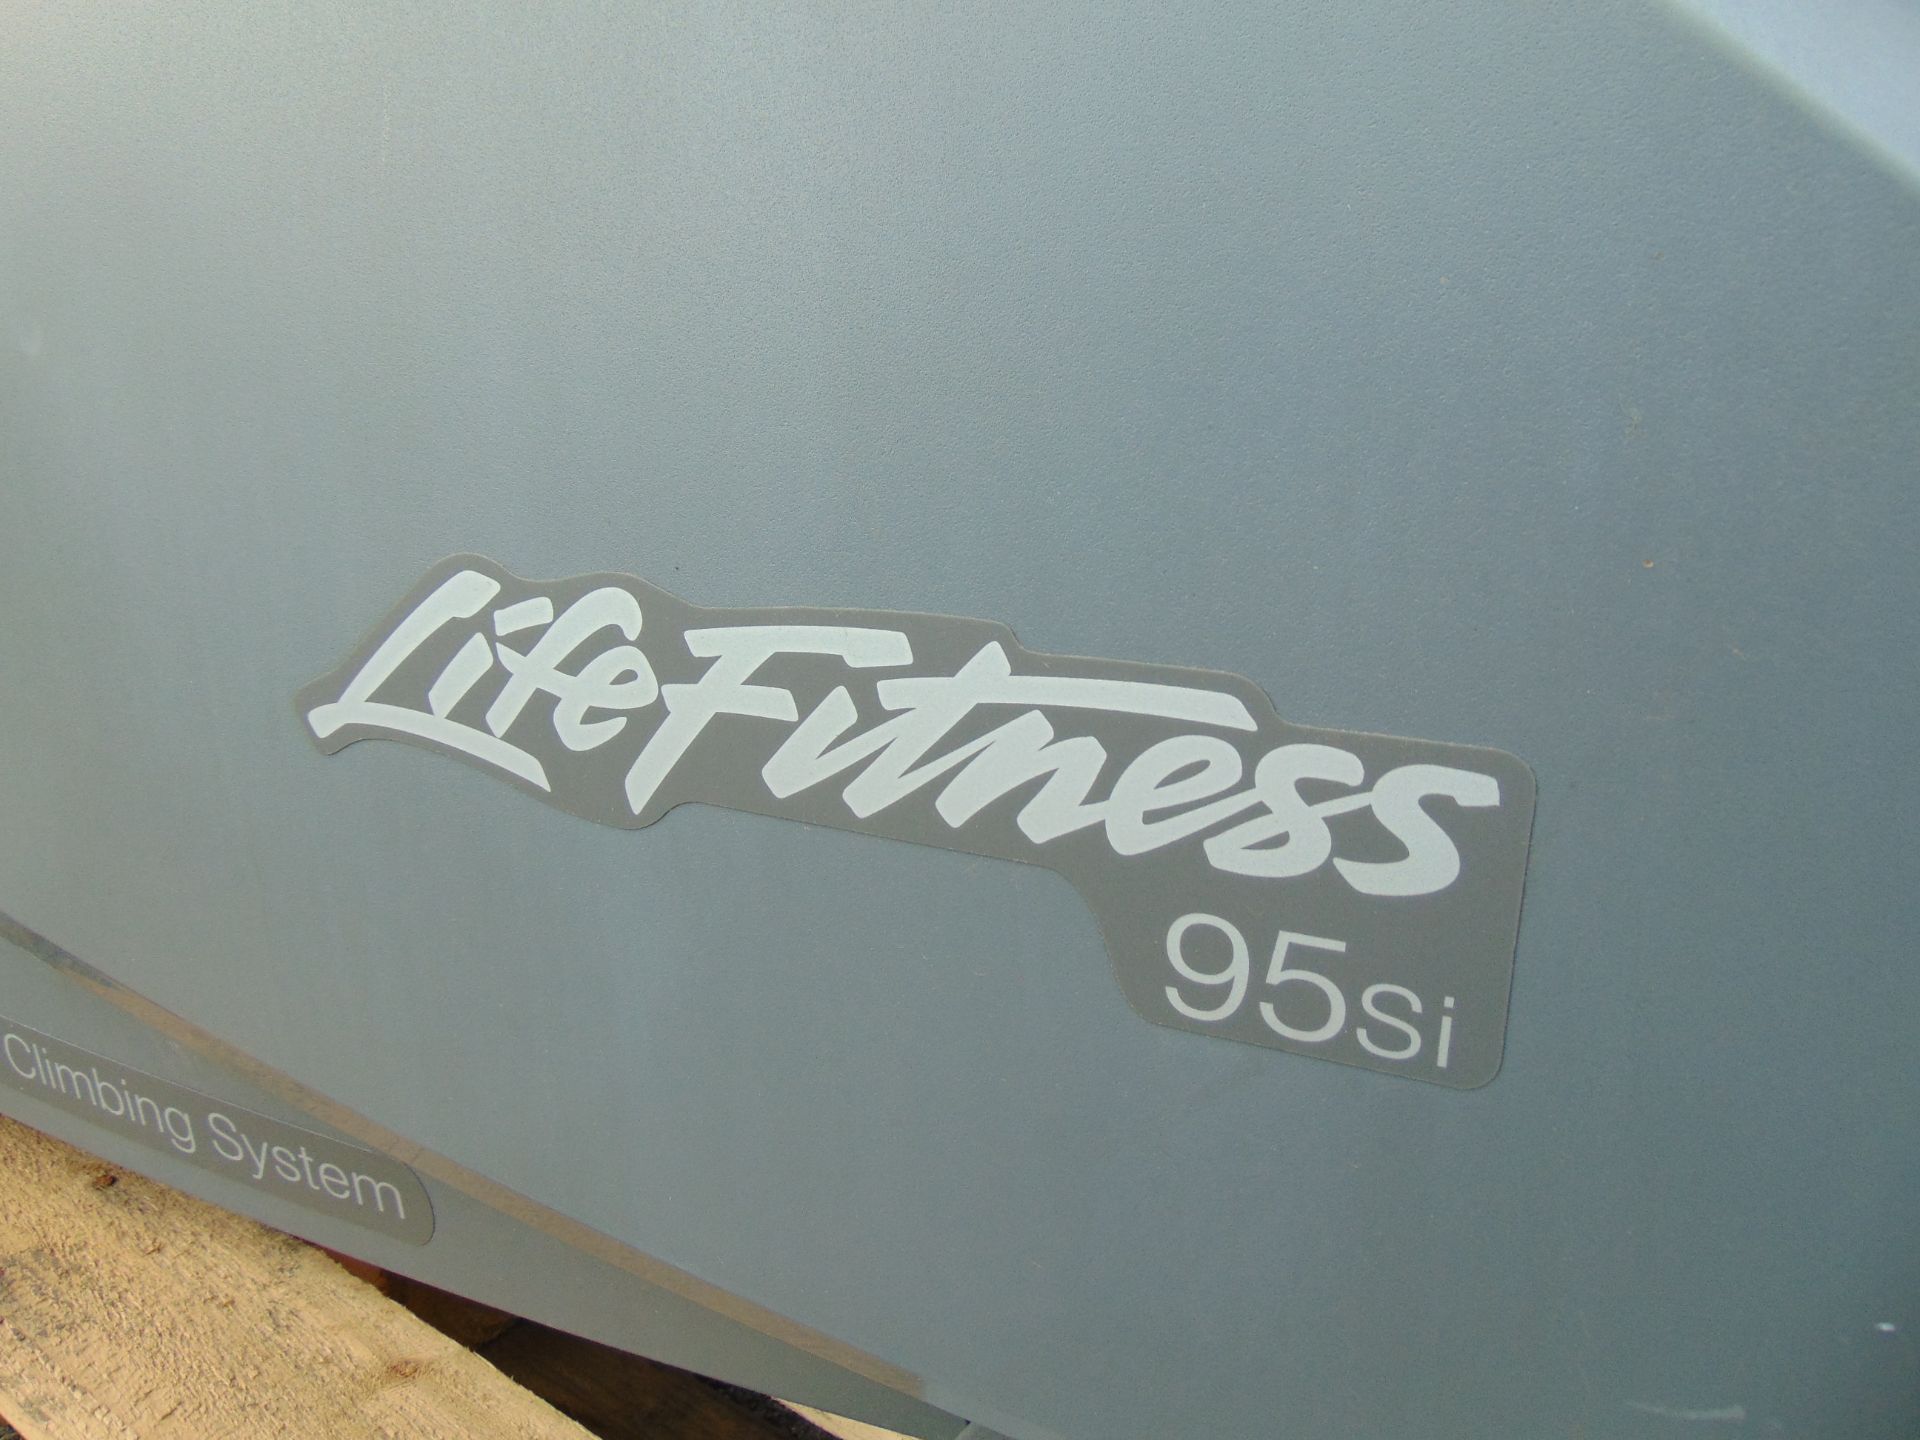 Life Fitness 95Si Stair Climber / Stepper Machine - Image 12 of 12